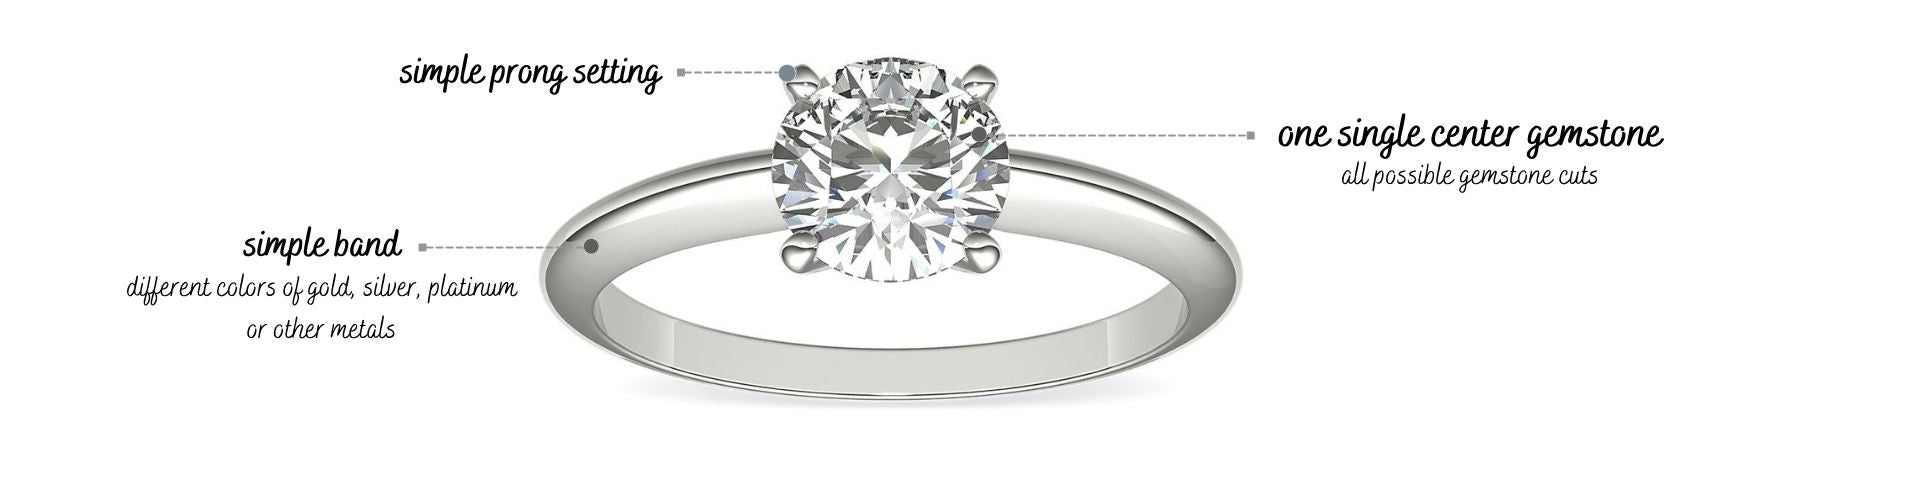 Different Types of Solitaire Diamond Engagement Rings - Royal Coster  Diamonds